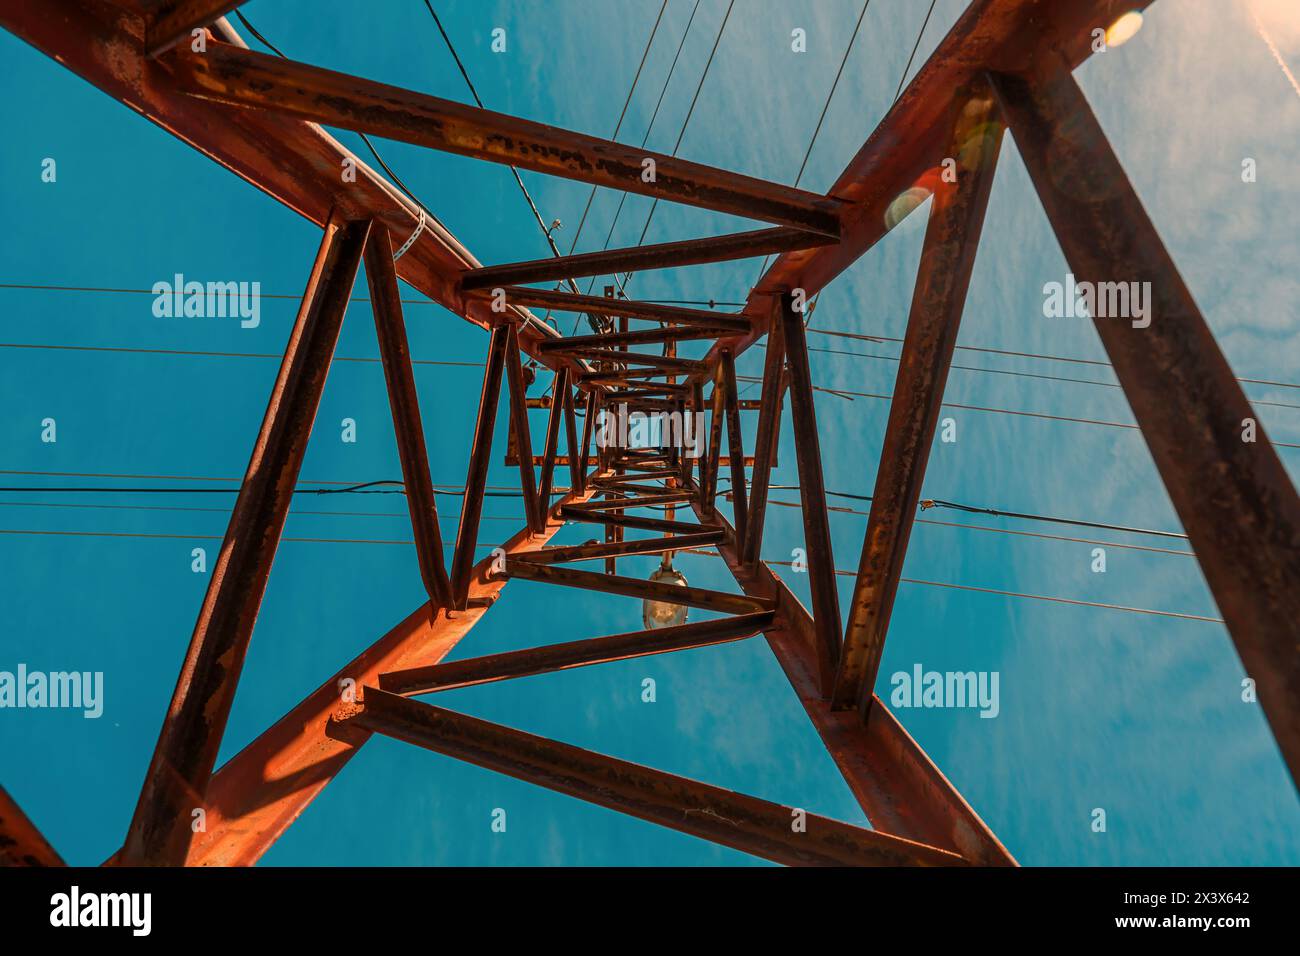 Old worn electricity pylon transmission tower, low angle view Stock Photo